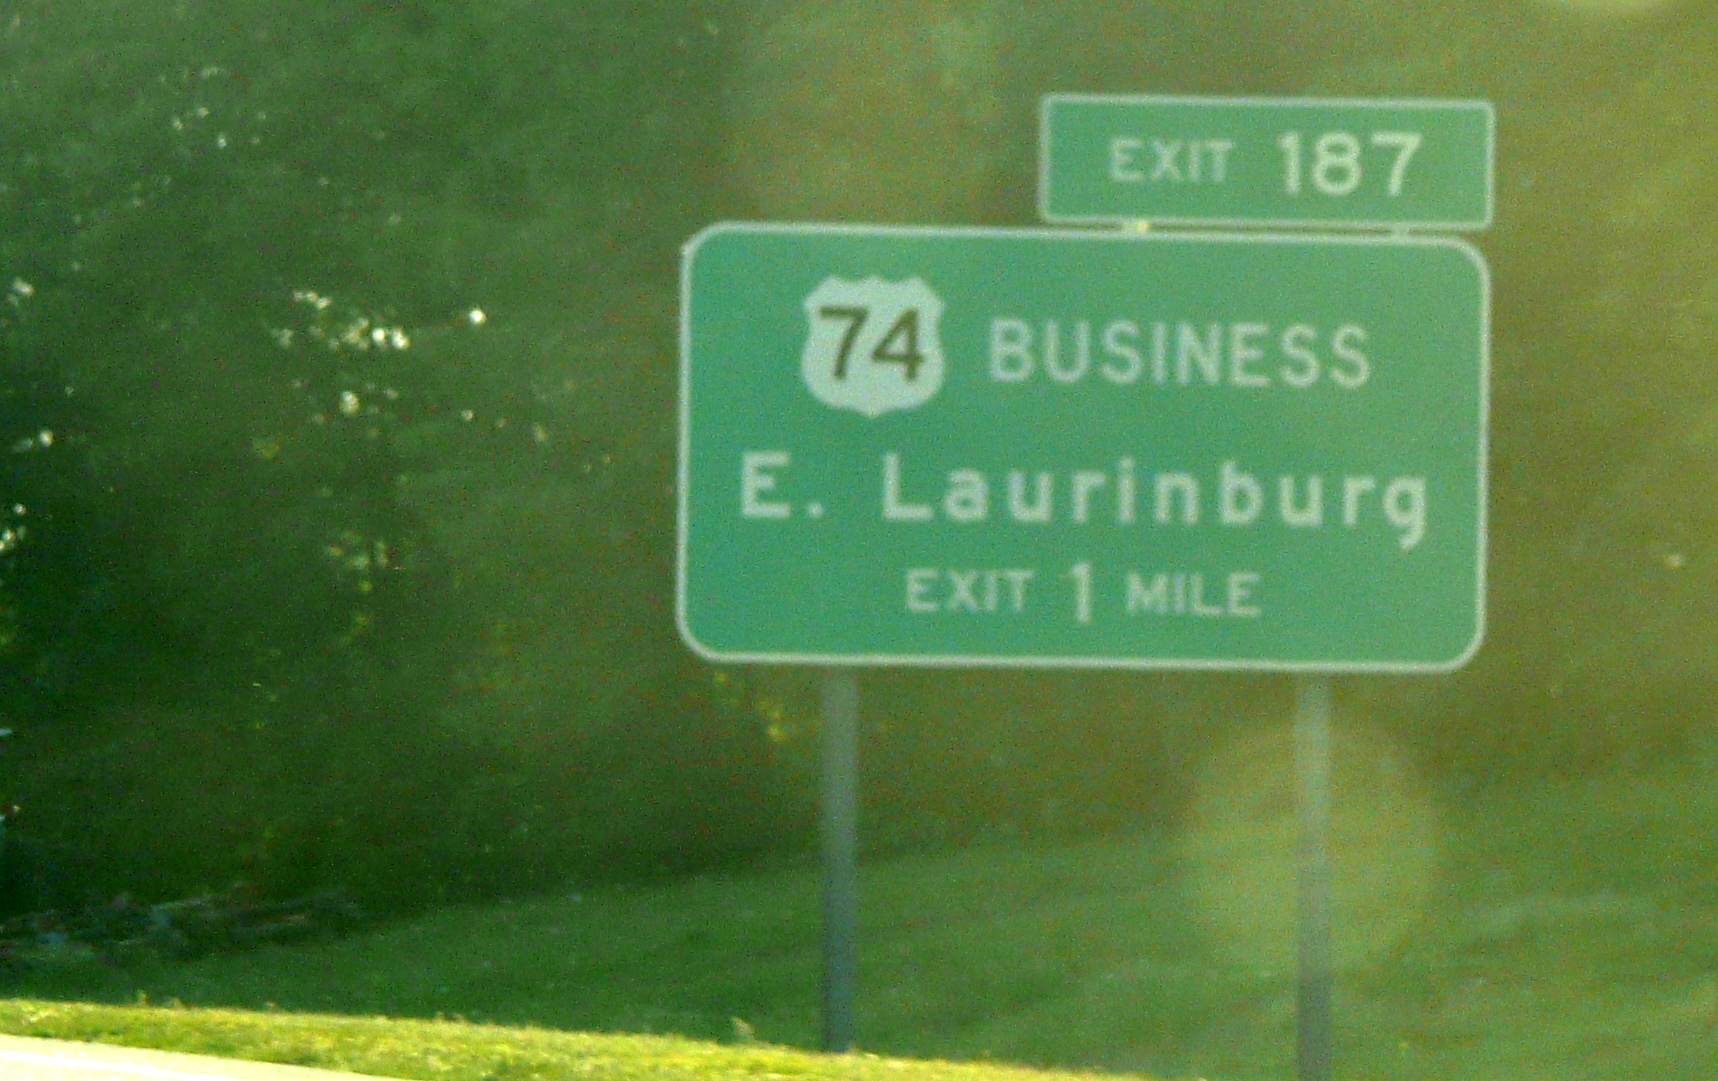 Photo of exit signage for US 74 Business exit on the 
Laurinburg Bypass, May 2009. Courtesy of James Mast